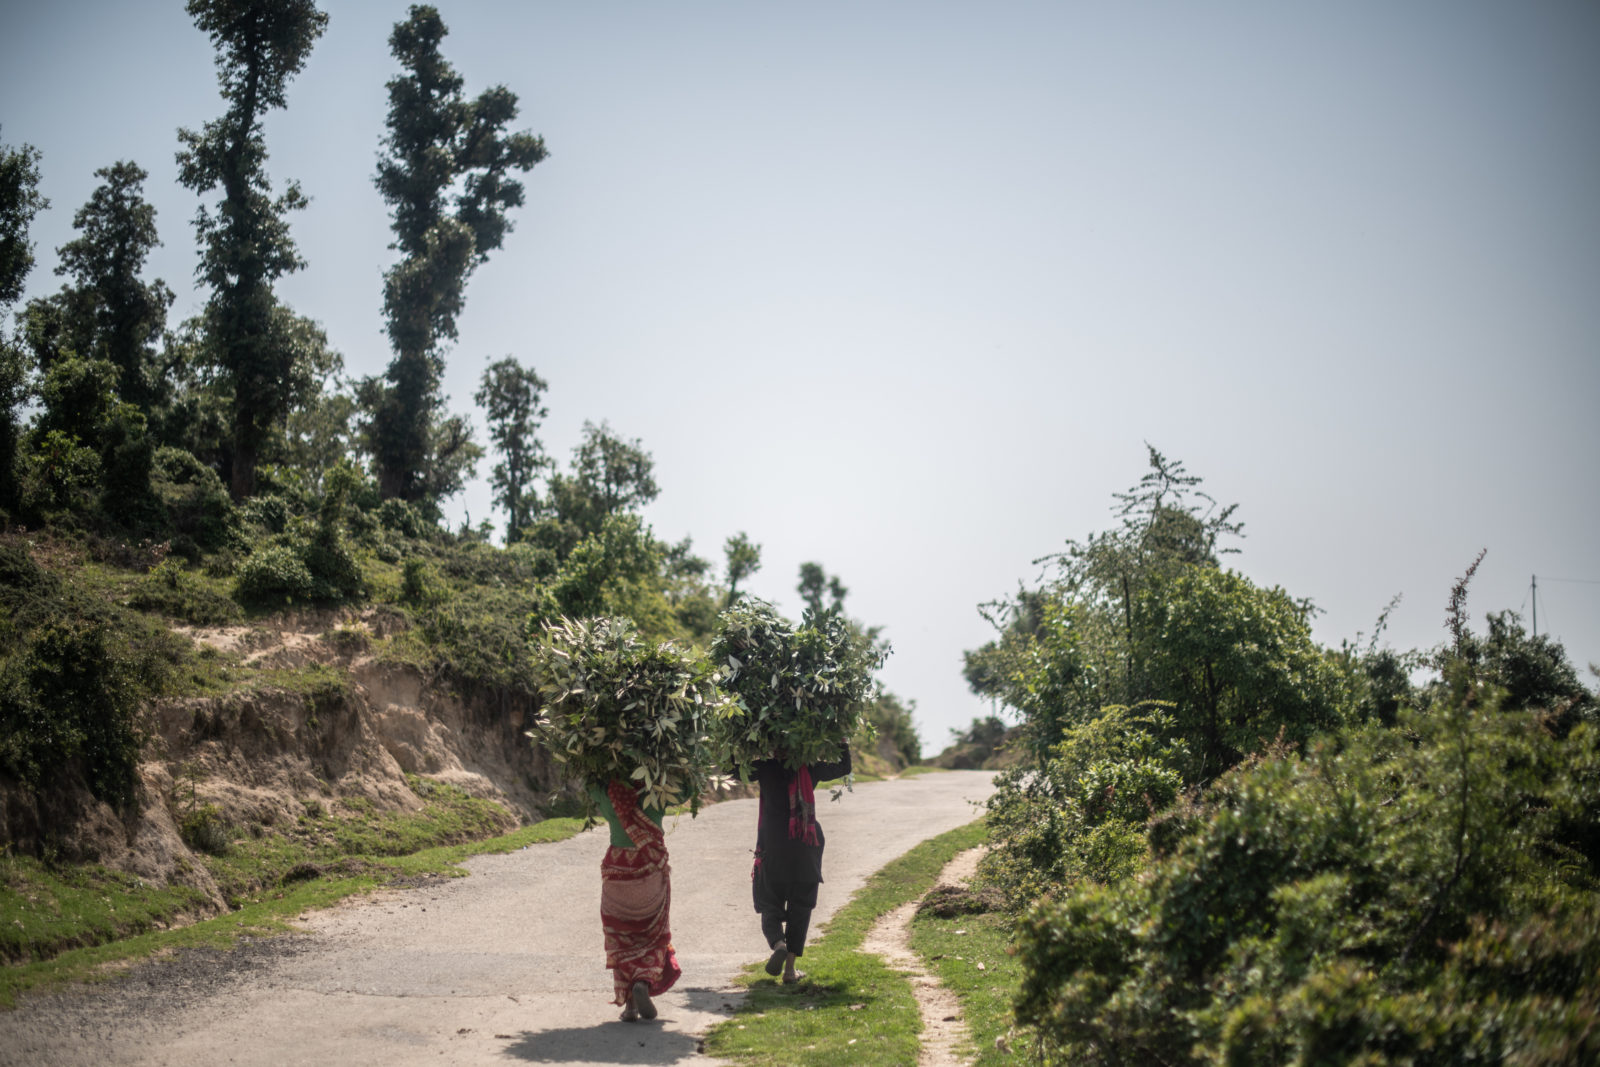 Two women walk on a road carrying plants on their heads.